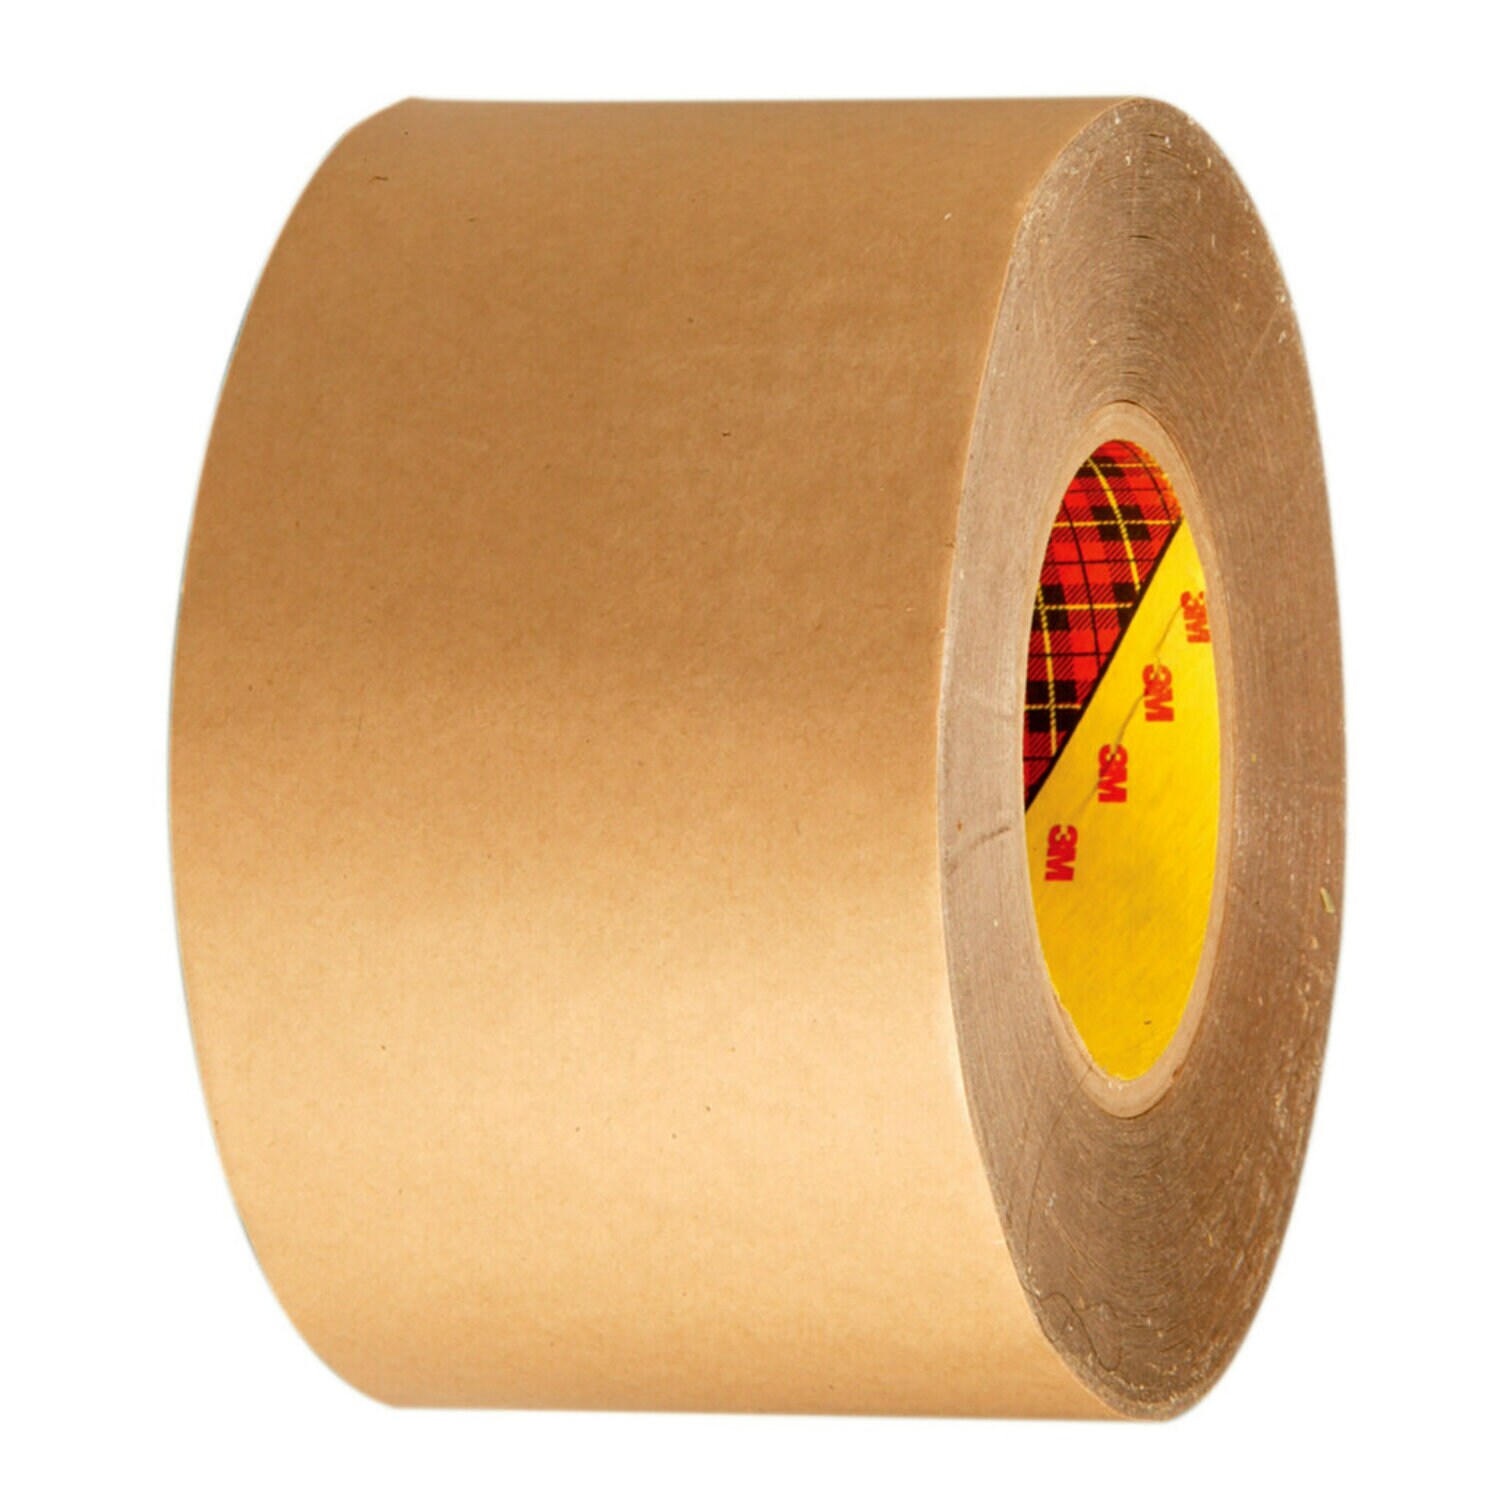 3M™ Removable Repositionable Tape 9415PC